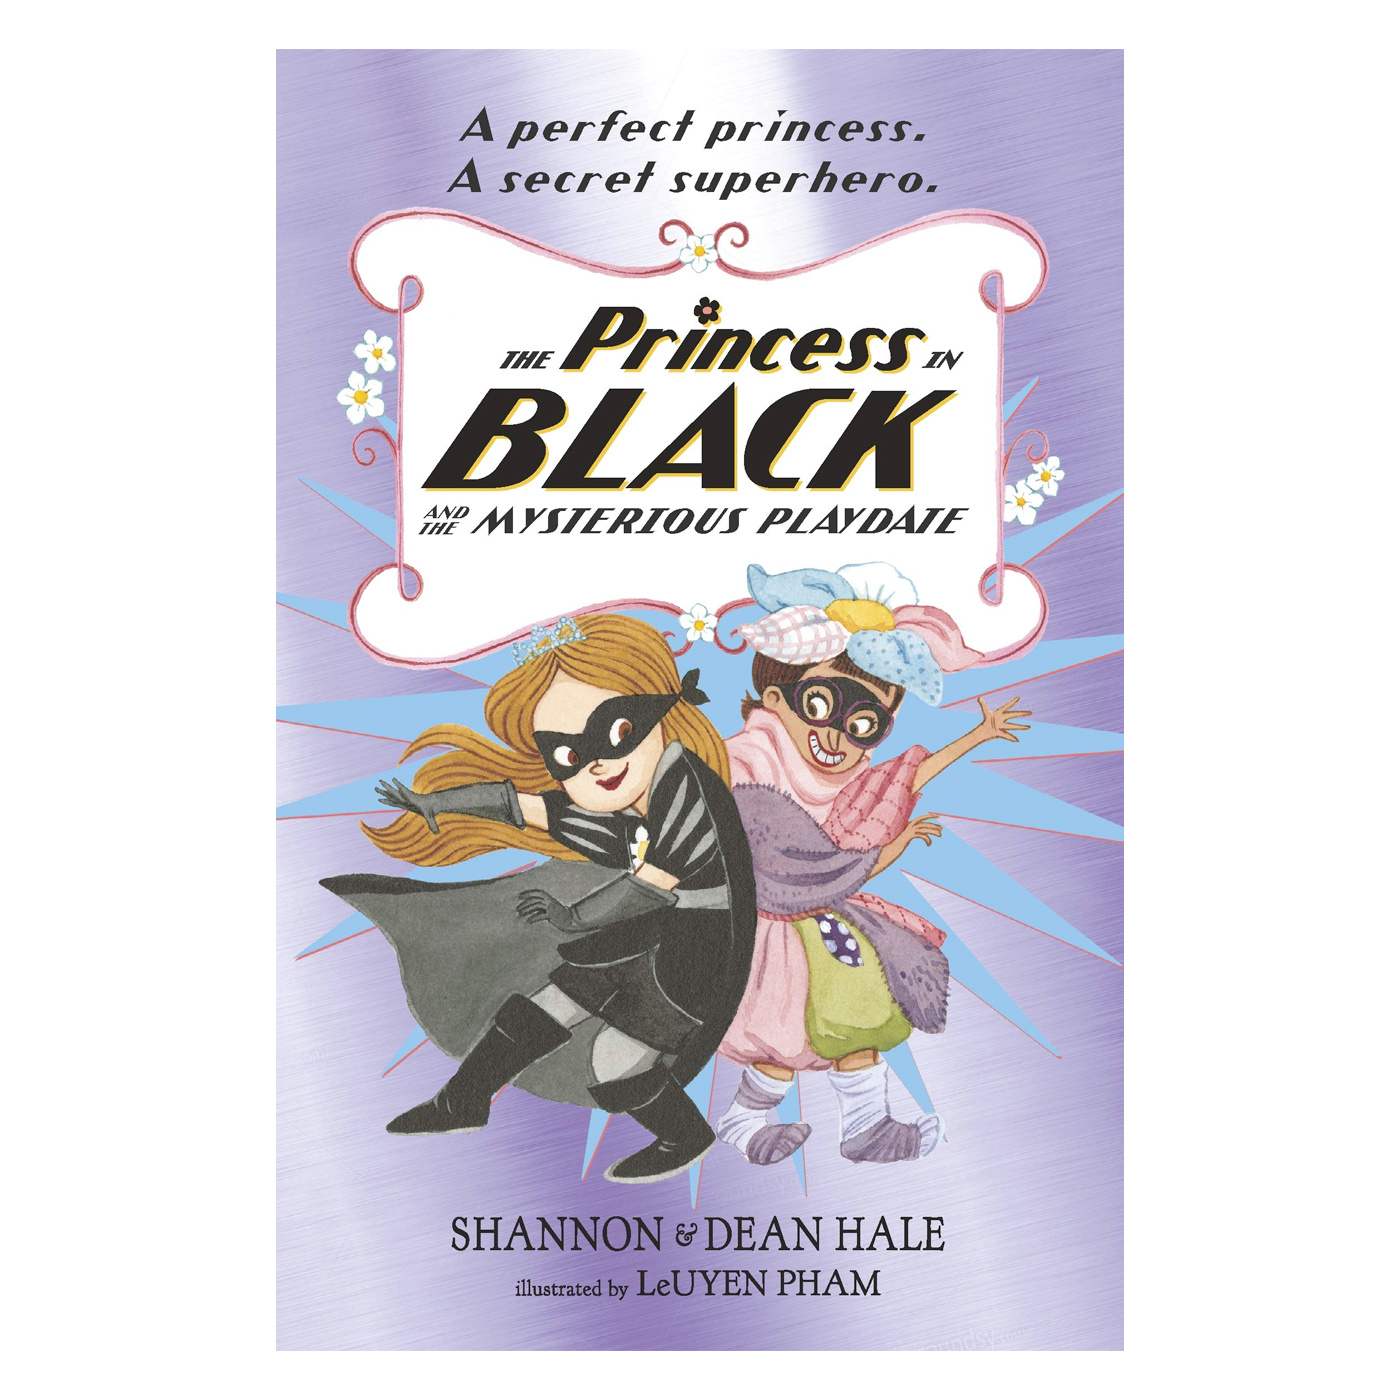  Princess In Black And The Mysterious Playdate